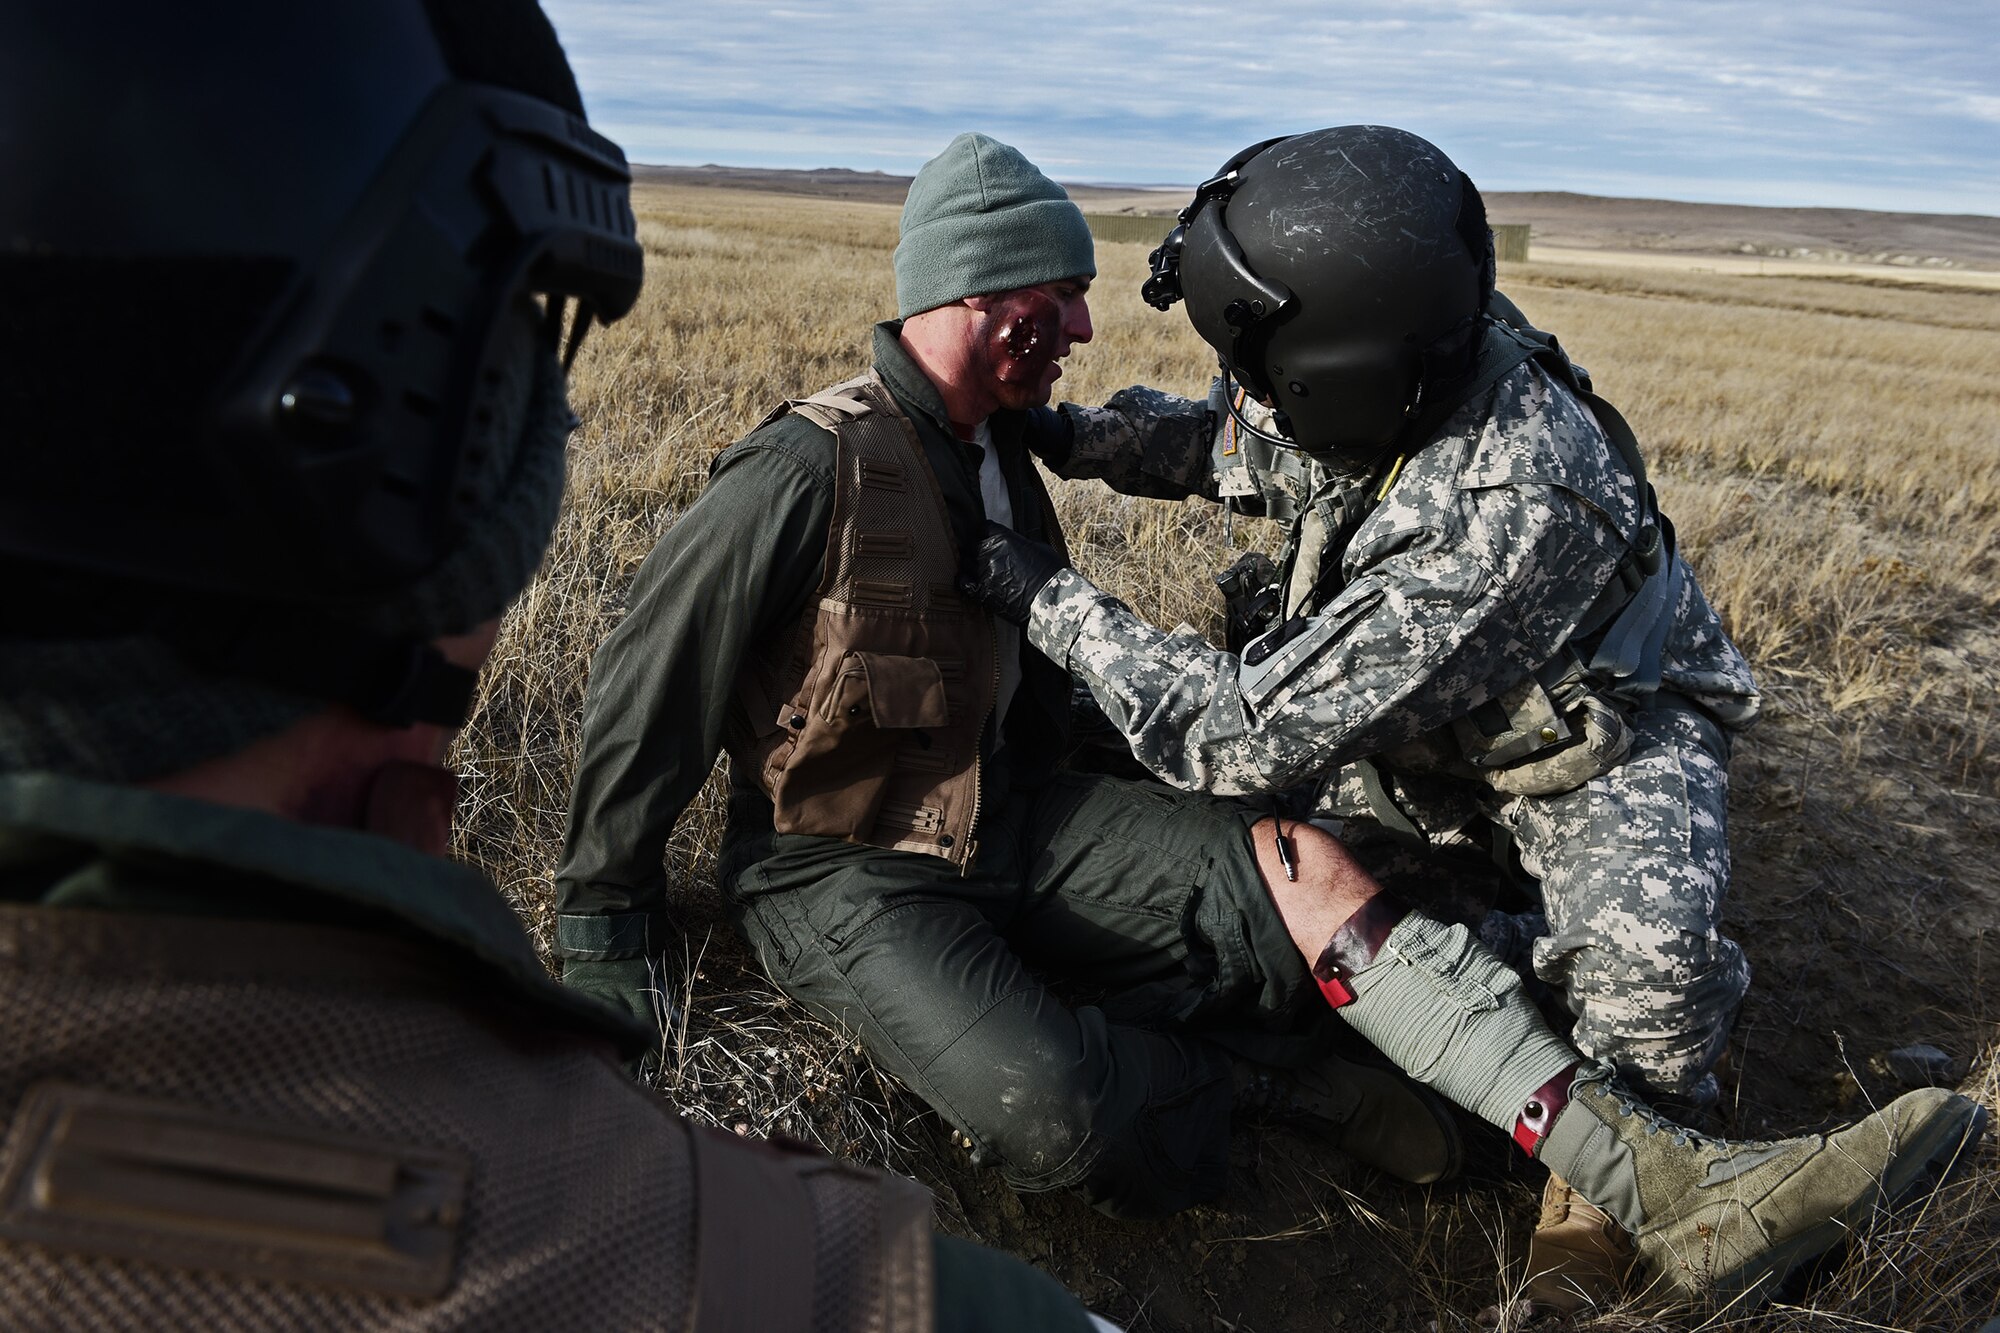 A soldier from the South Dakota National Guard’s Company C, 1st Battalion, 189th Aviation Regiment, provides medical care to a downed B-1 pilot near Belle Fourche, S.D., Nov. 16, 2016. The training scenario involved a show of force, followed by a rescue helicopter to evacuate the injured pilots. (U.S. Air Force photo by Airman 1st Class James L. Miller)